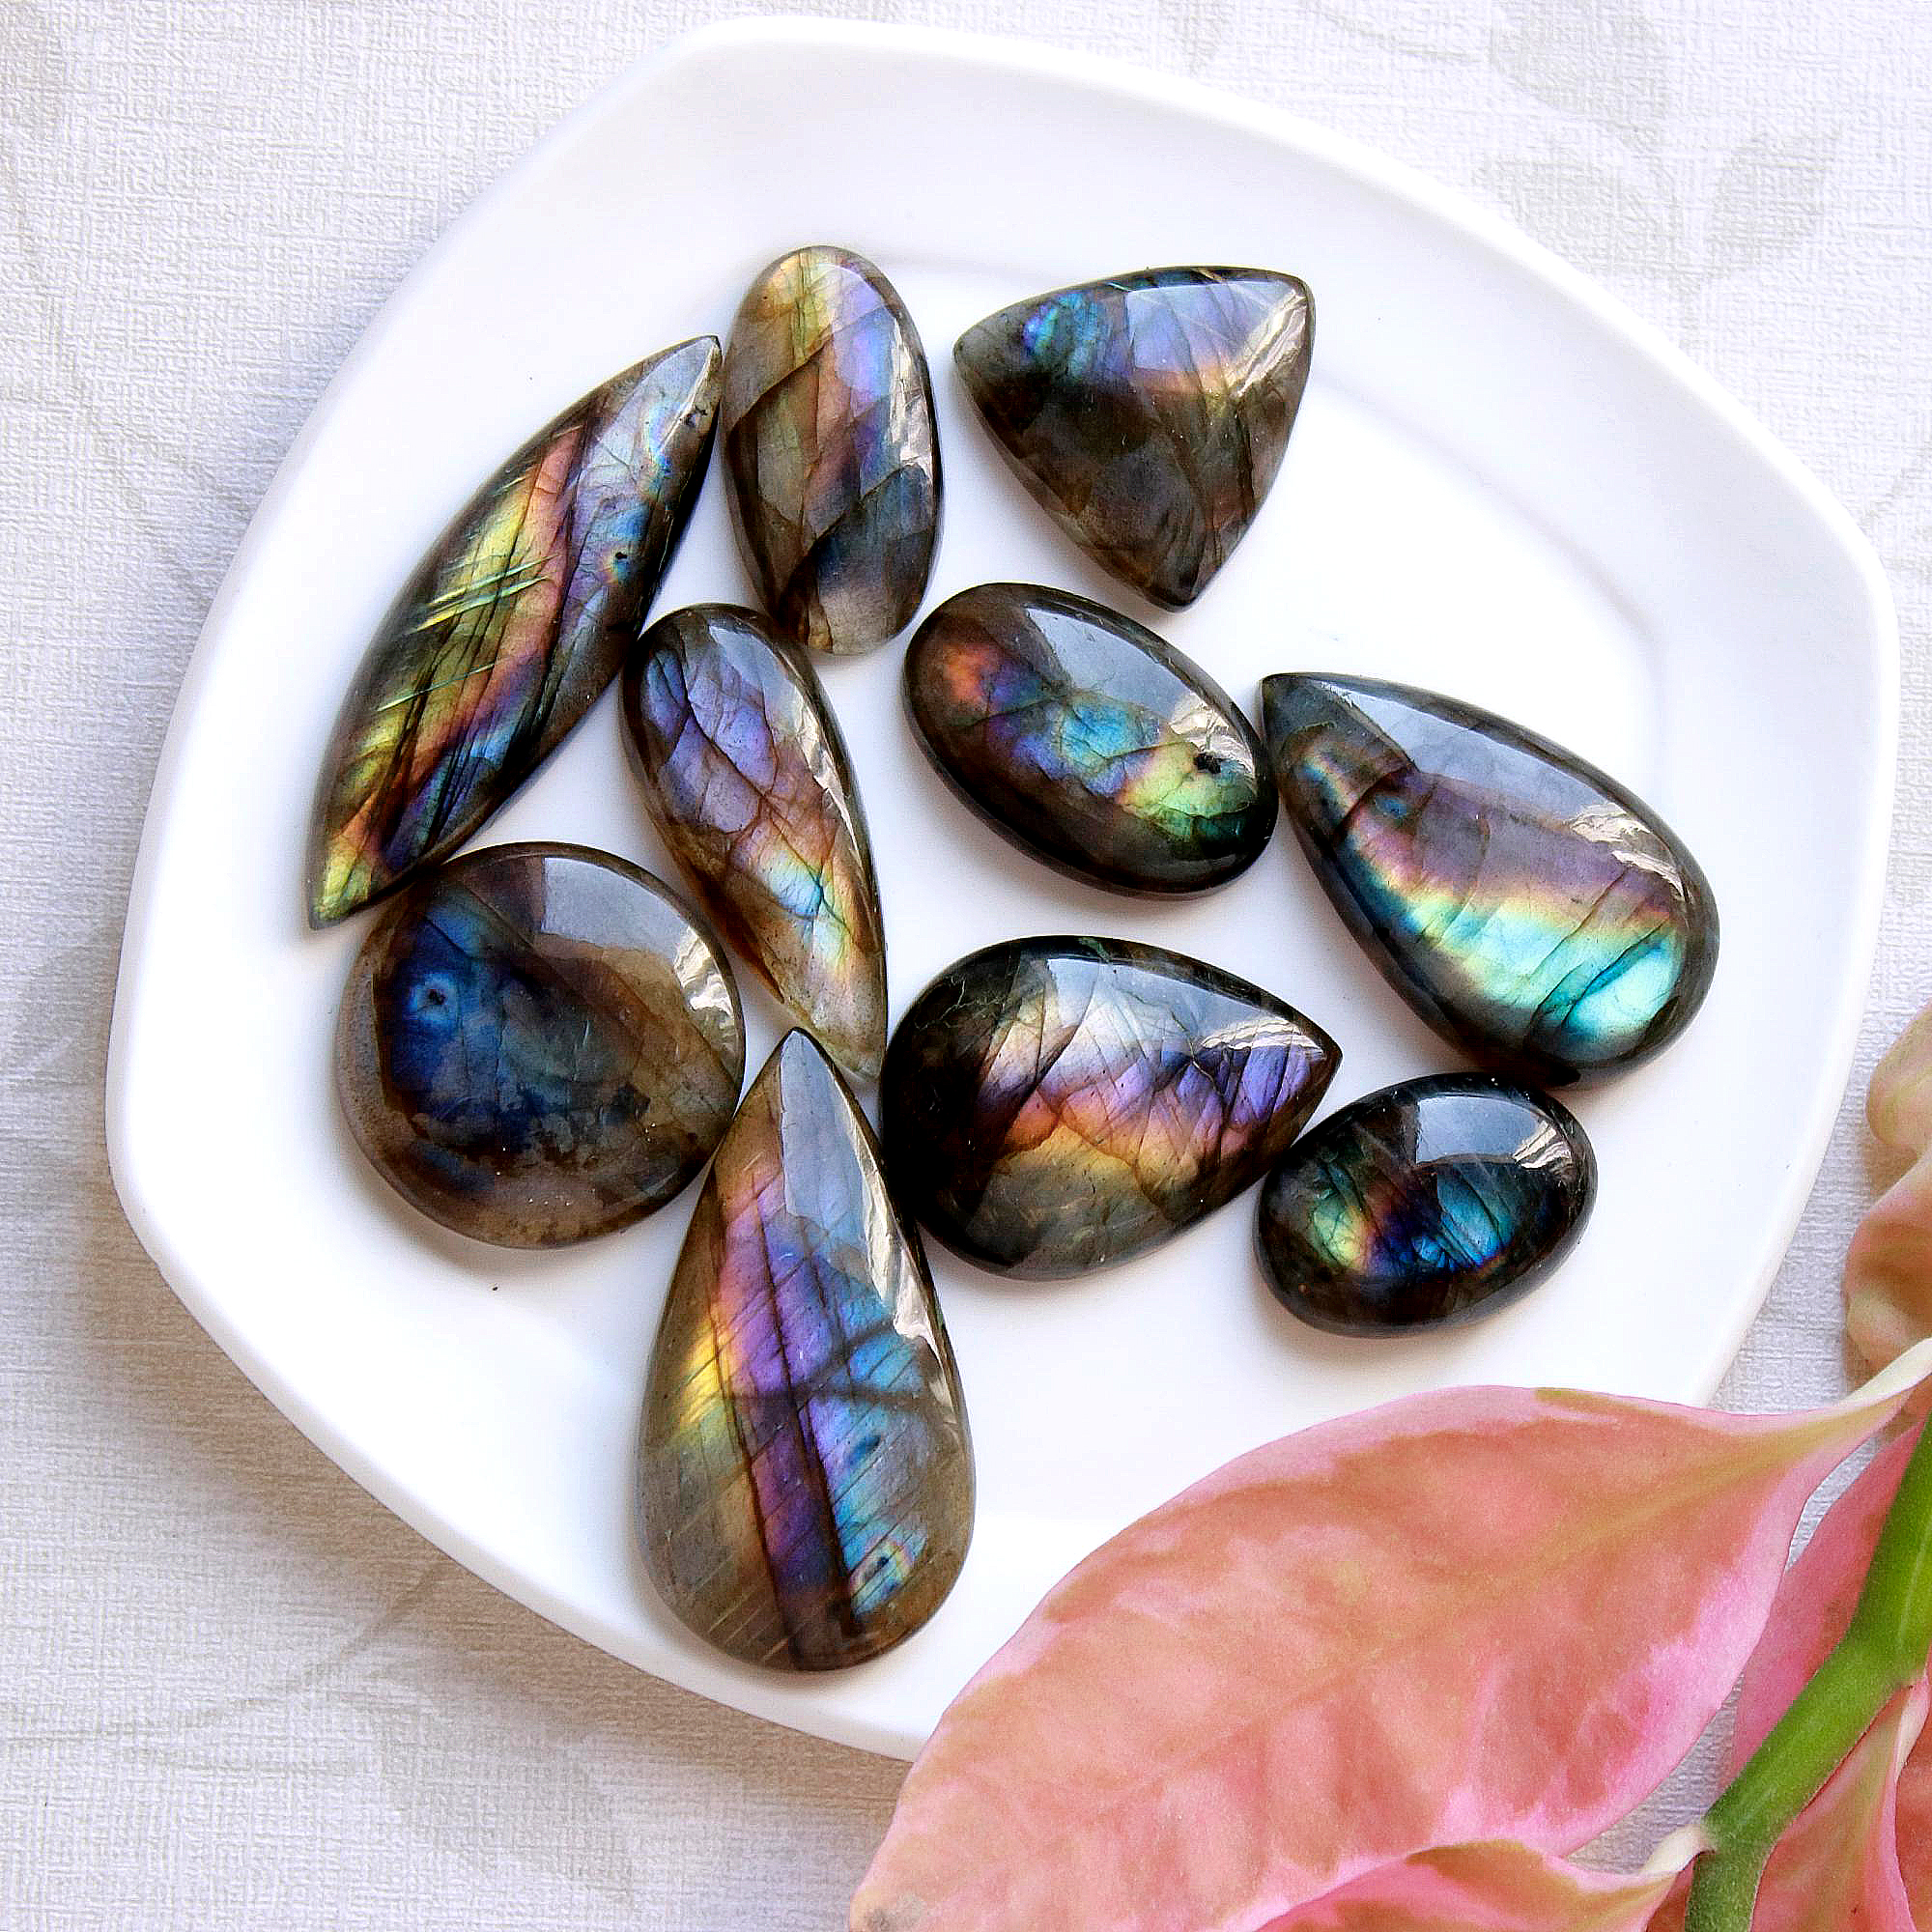 10 Pcs191Cts Natural Multifire Labradorite Loose Cabochon Gemstone Lot Both Side Polished For Jewelry Making 40x13 20x21mm#1105